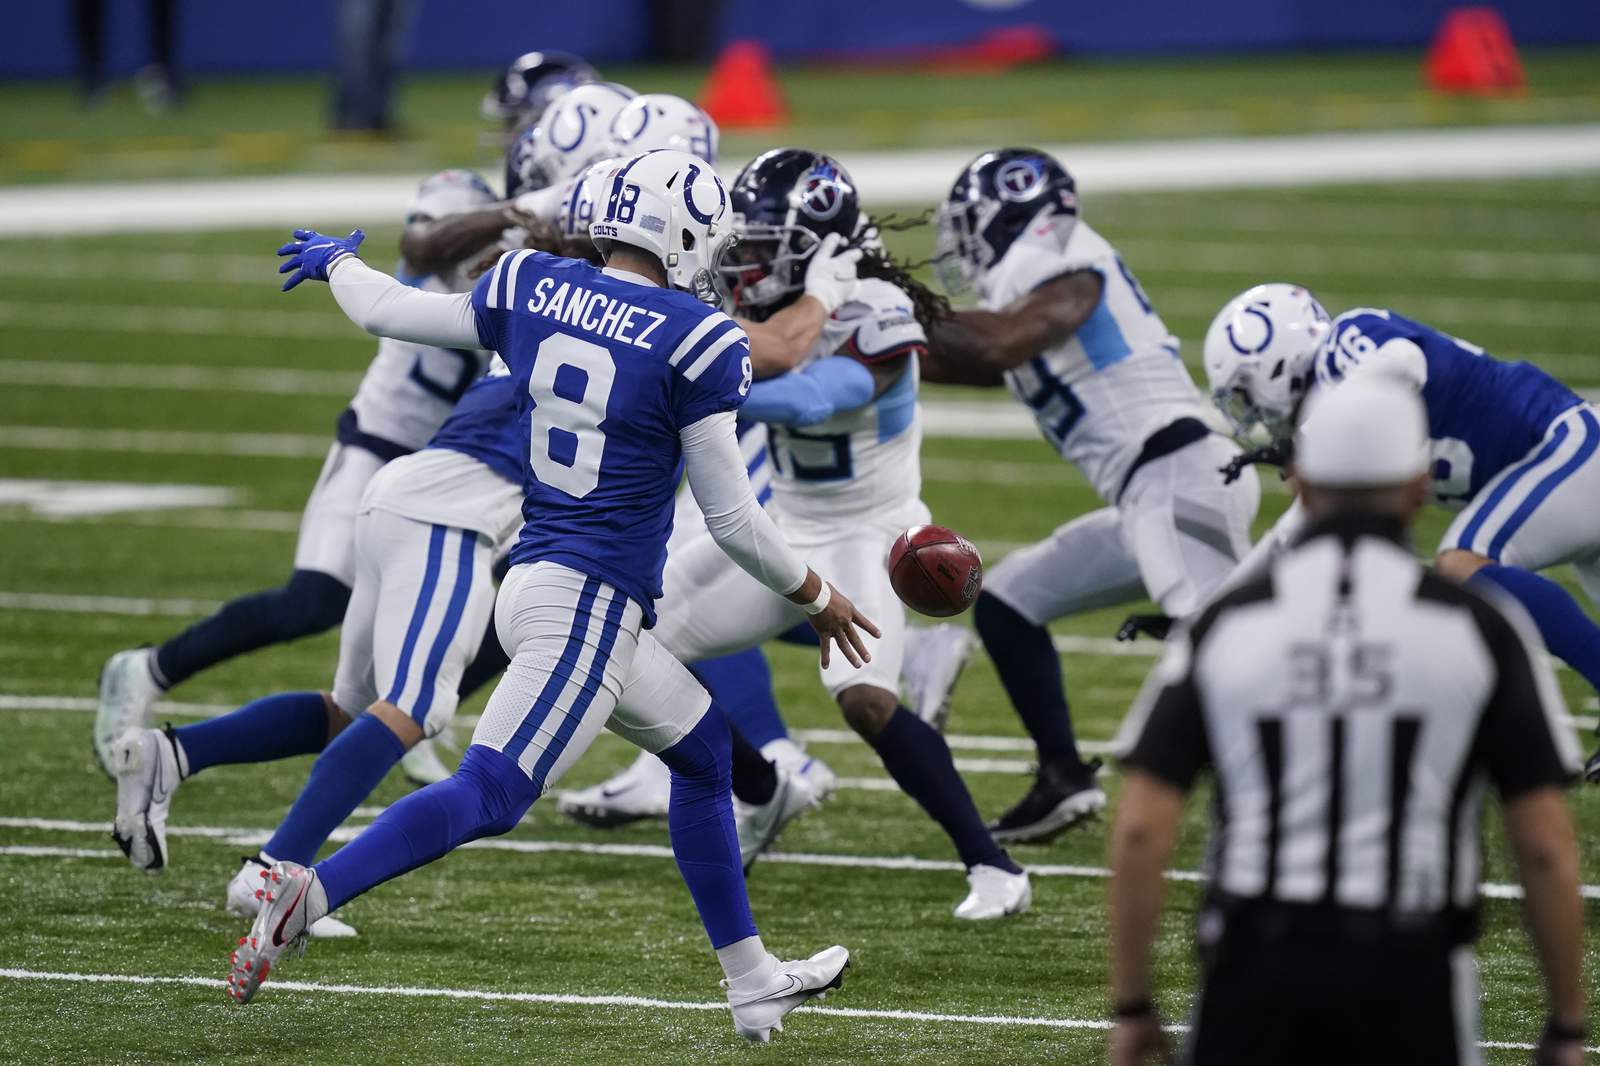 The Latest: Lions kicker Prater ties NFL record